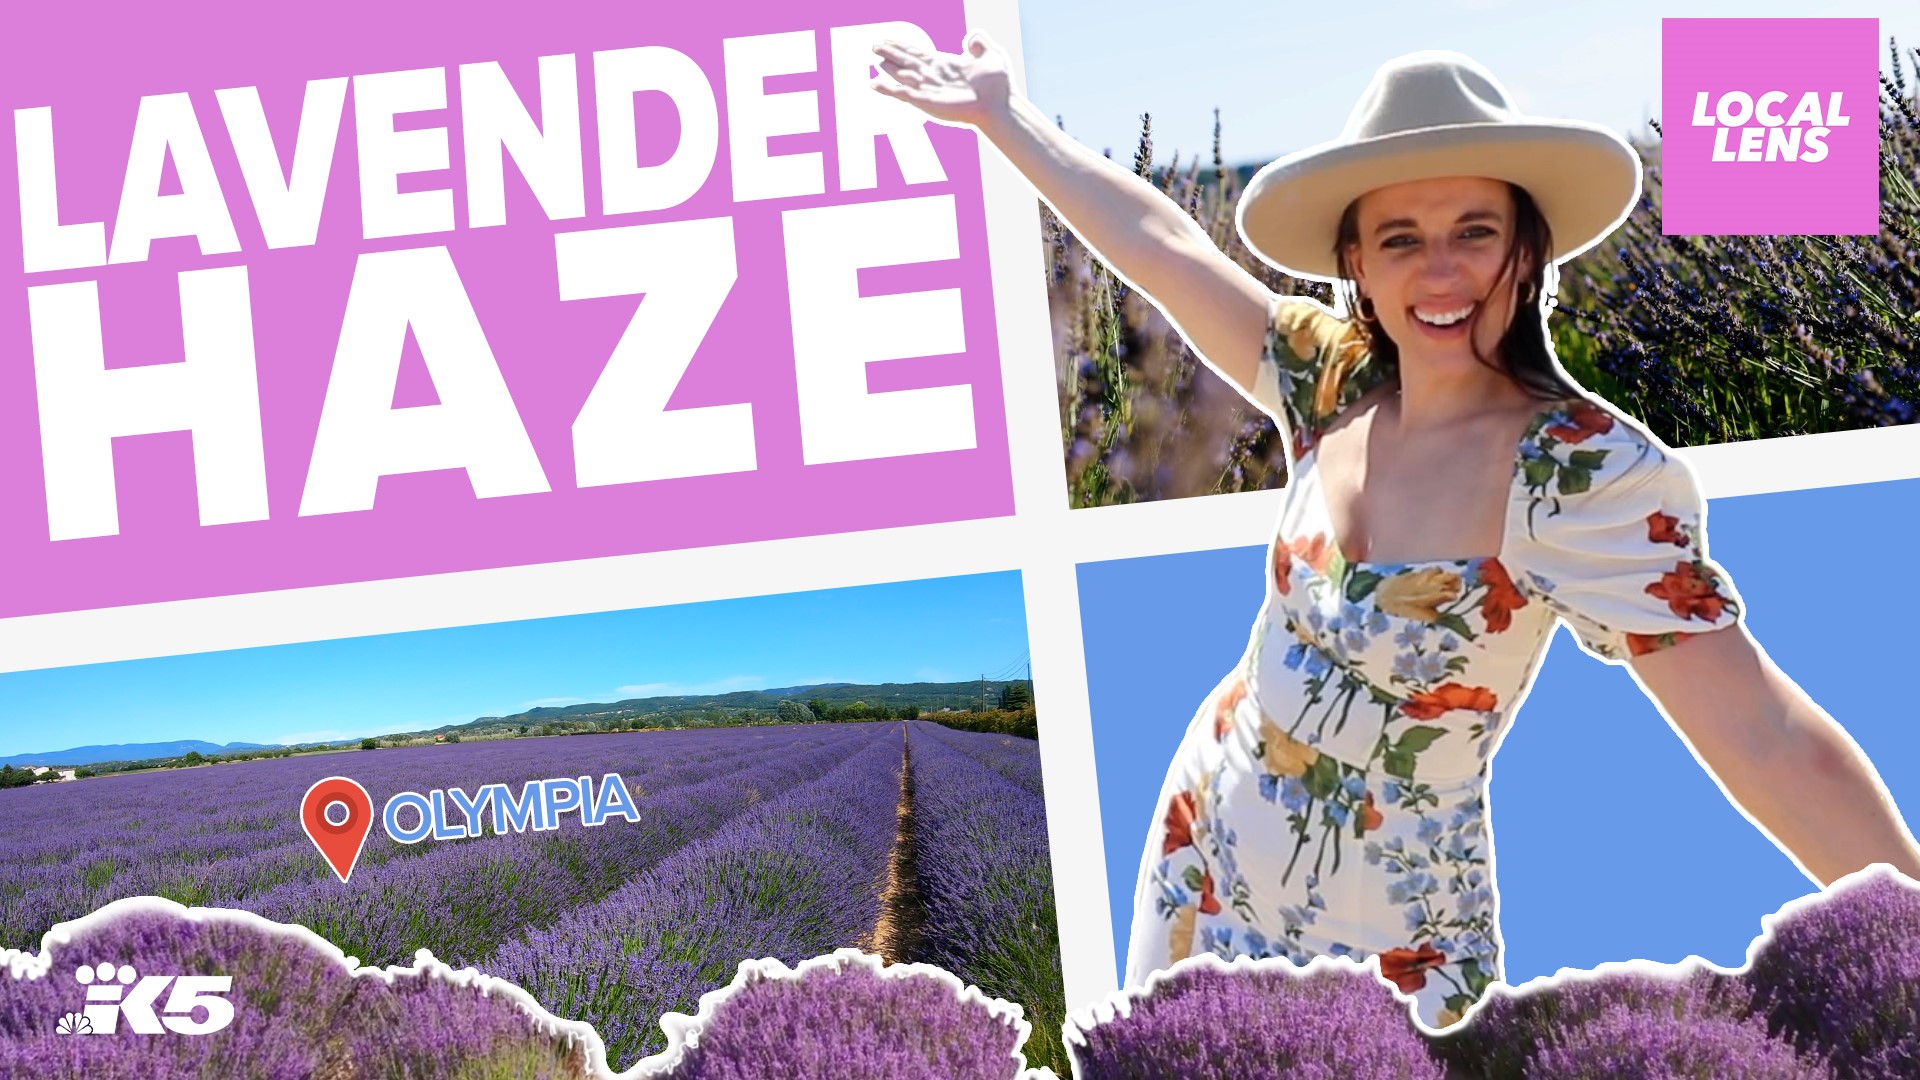 I’m apparently in my lavender haze era! I got to visit some dreamy lavender 💜 farms near Olympia, Washington, and I learned so much about the process.